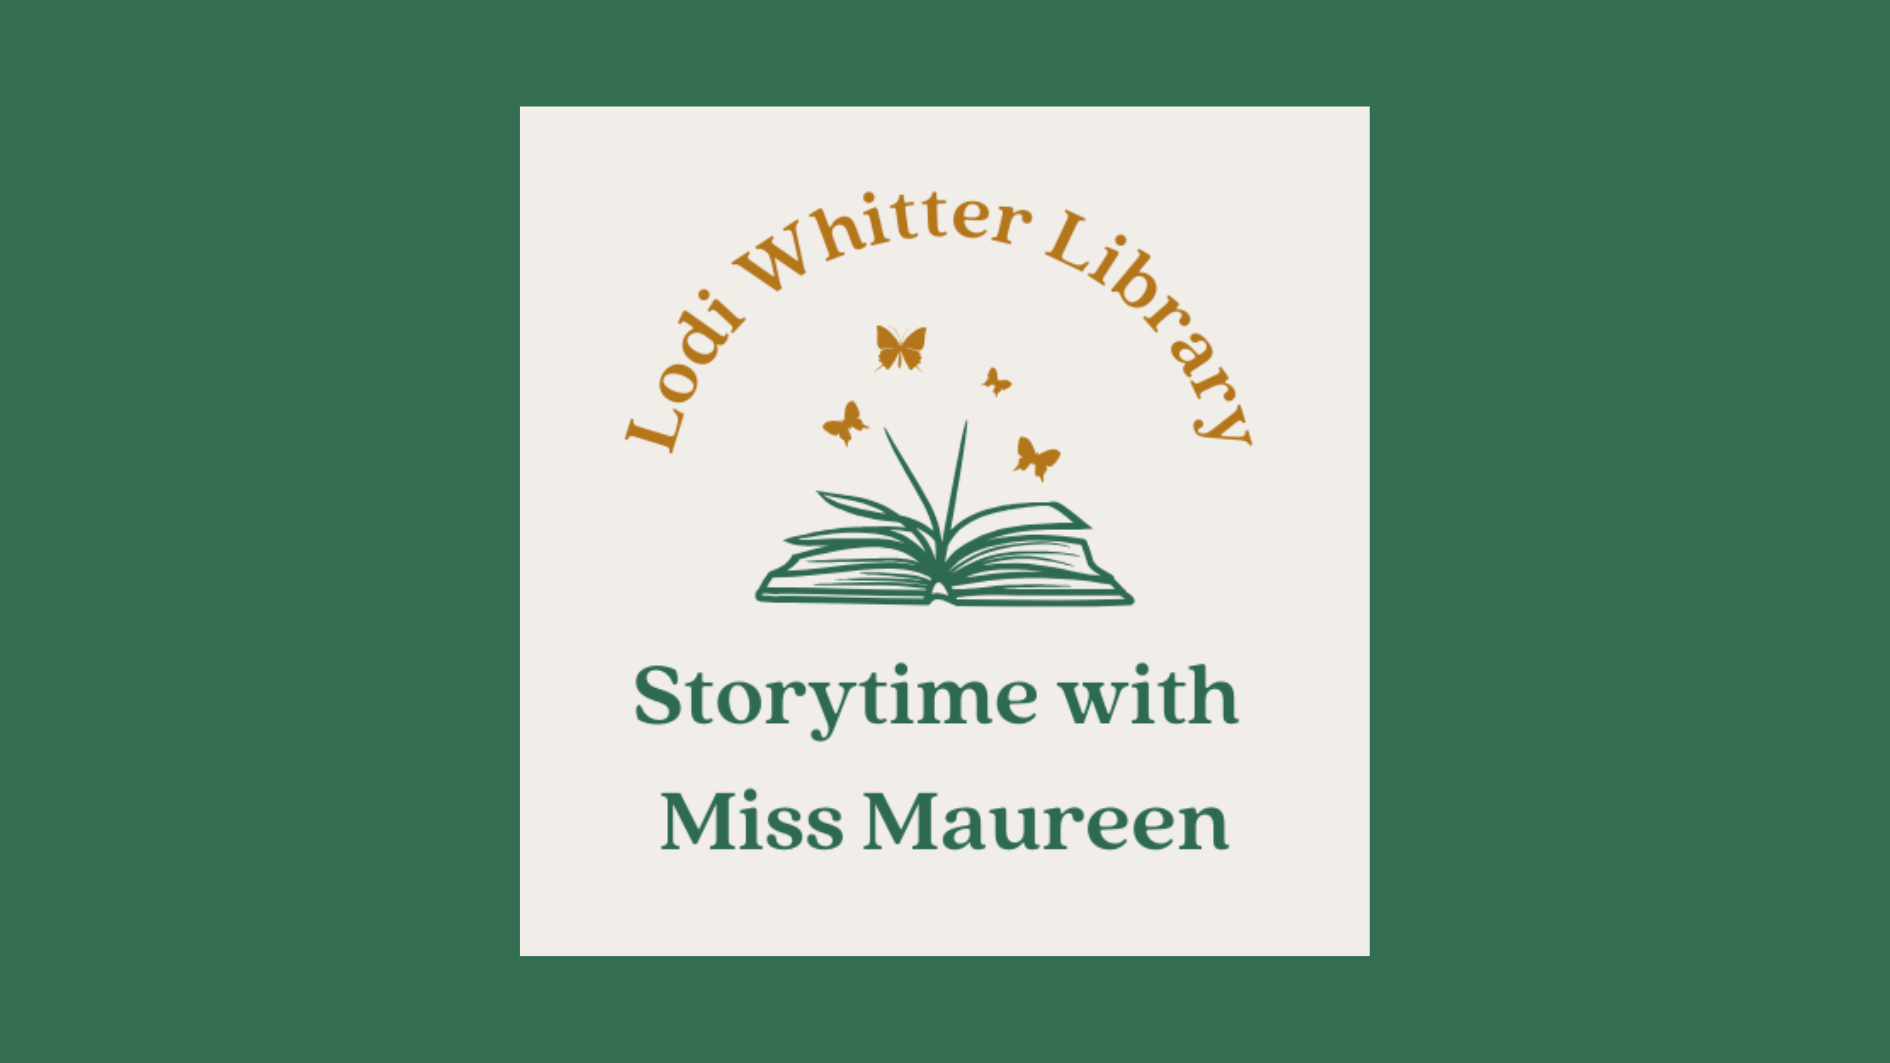 Storytime with Miss Maureen